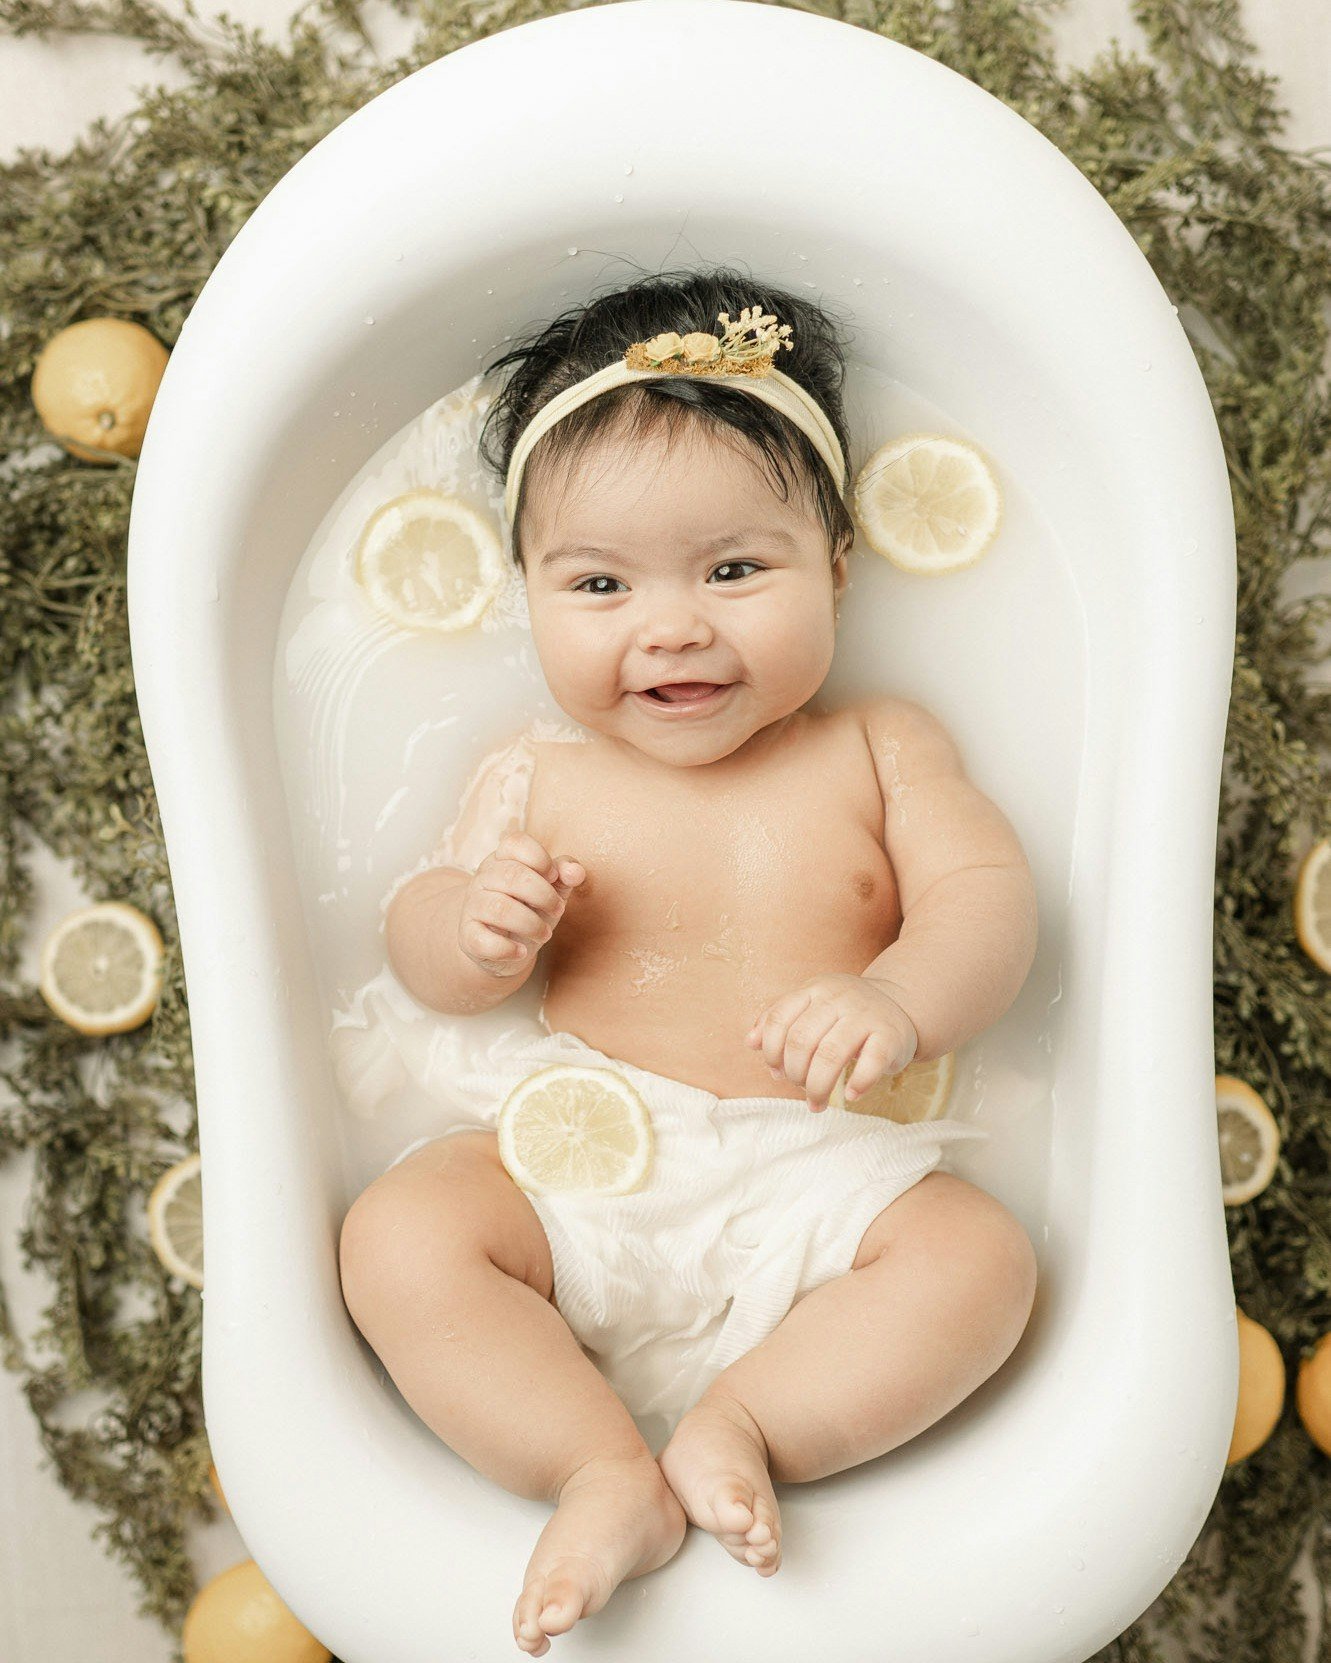 Now offering milk bath add ons for our milestone and cake smash sessions! We can add fruits, florals or just milk! Recommended for babies who can sit independently and love the water!

#houstonmilestonephotographer #houstonfamilyphotographer #houston